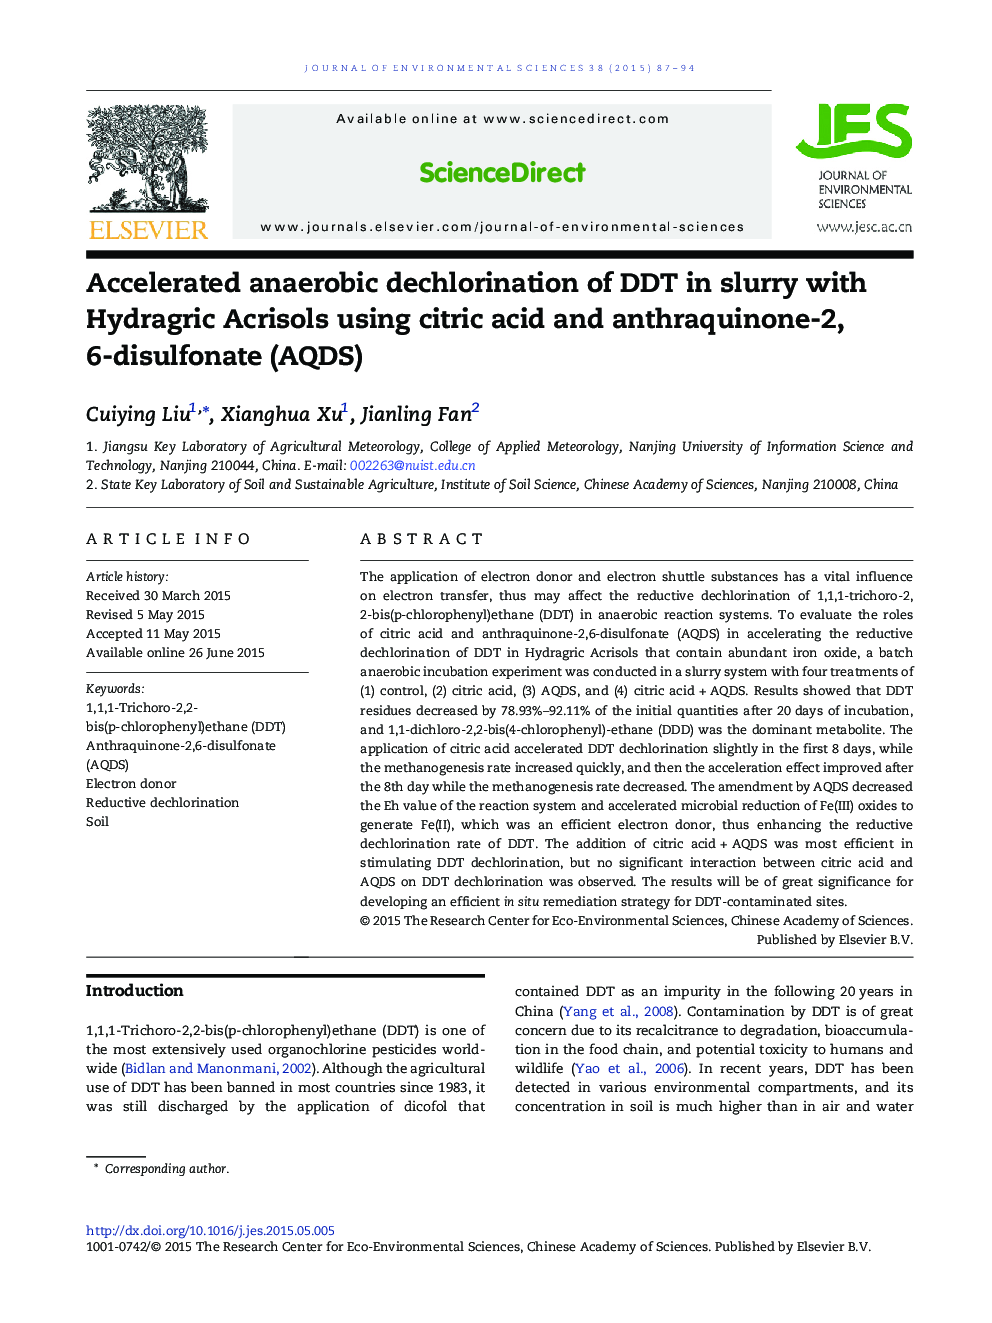 Accelerated anaerobic dechlorination of DDT in slurry with Hydragric Acrisols using citric acid and anthraquinone-2,6-disulfonate (AQDS)